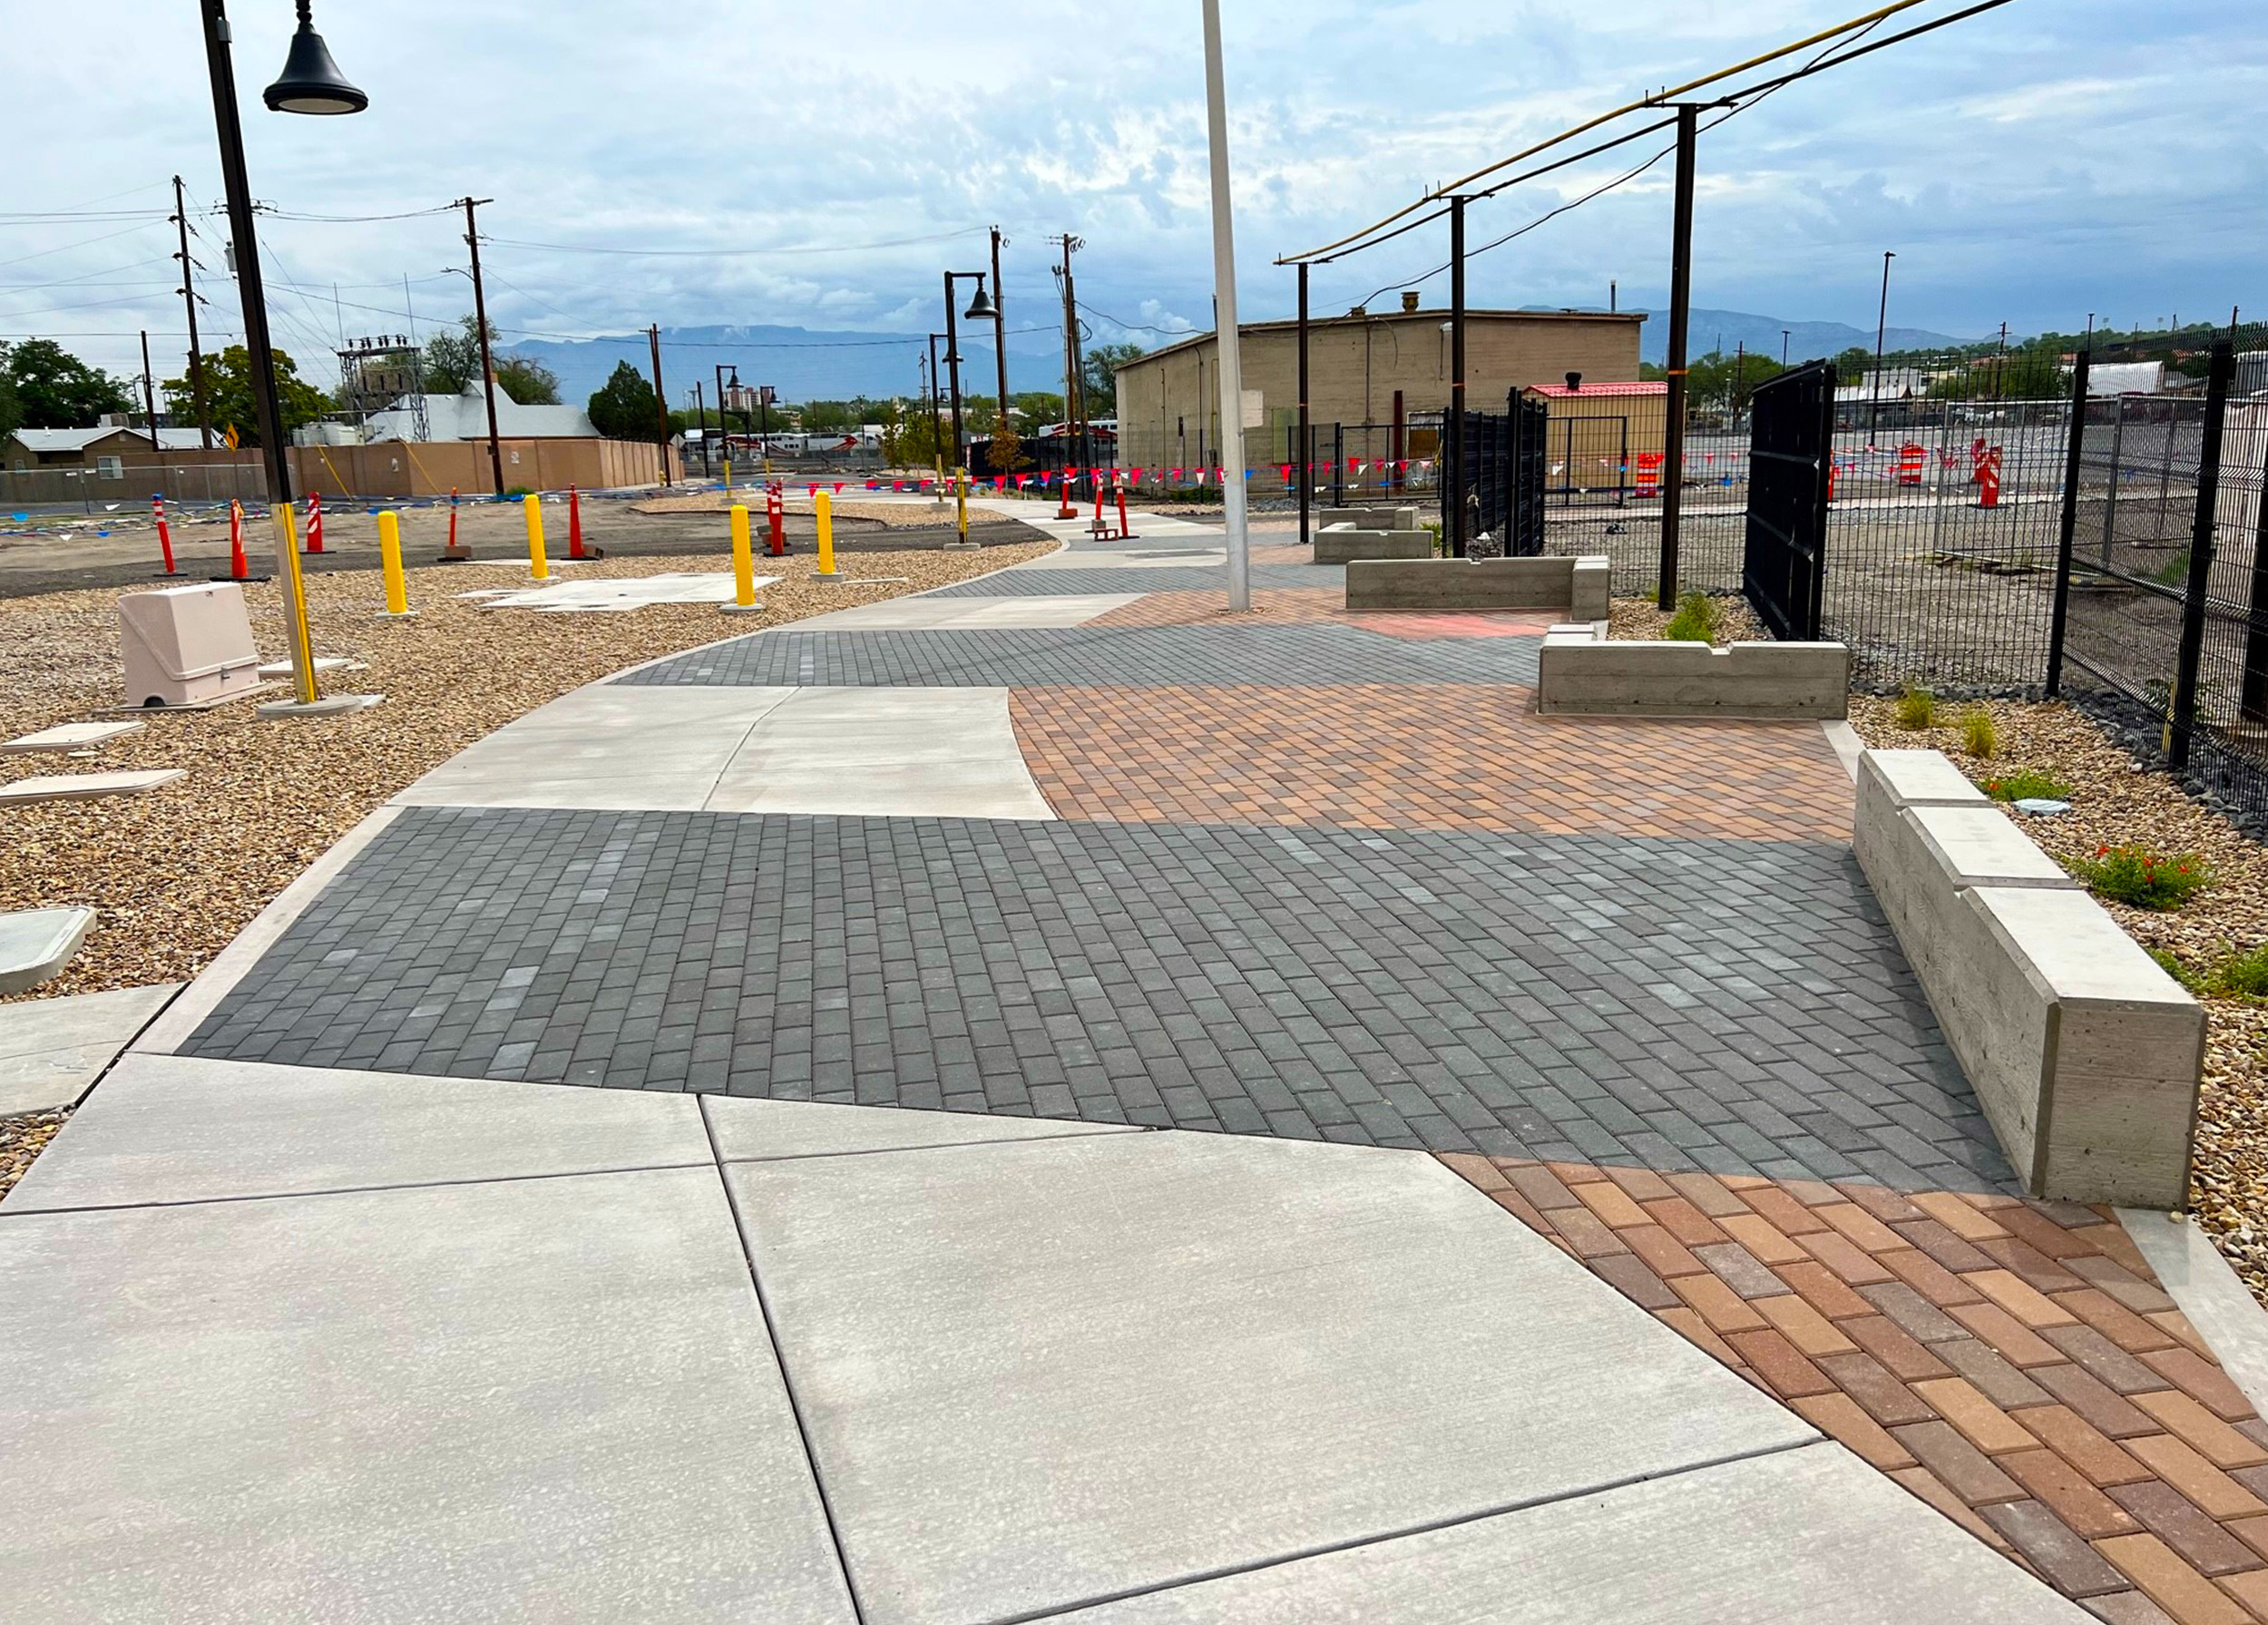 Wilson & Company provided civil engineering services for parking lot improvements, streetscapes, trails, and the plaza’s design.